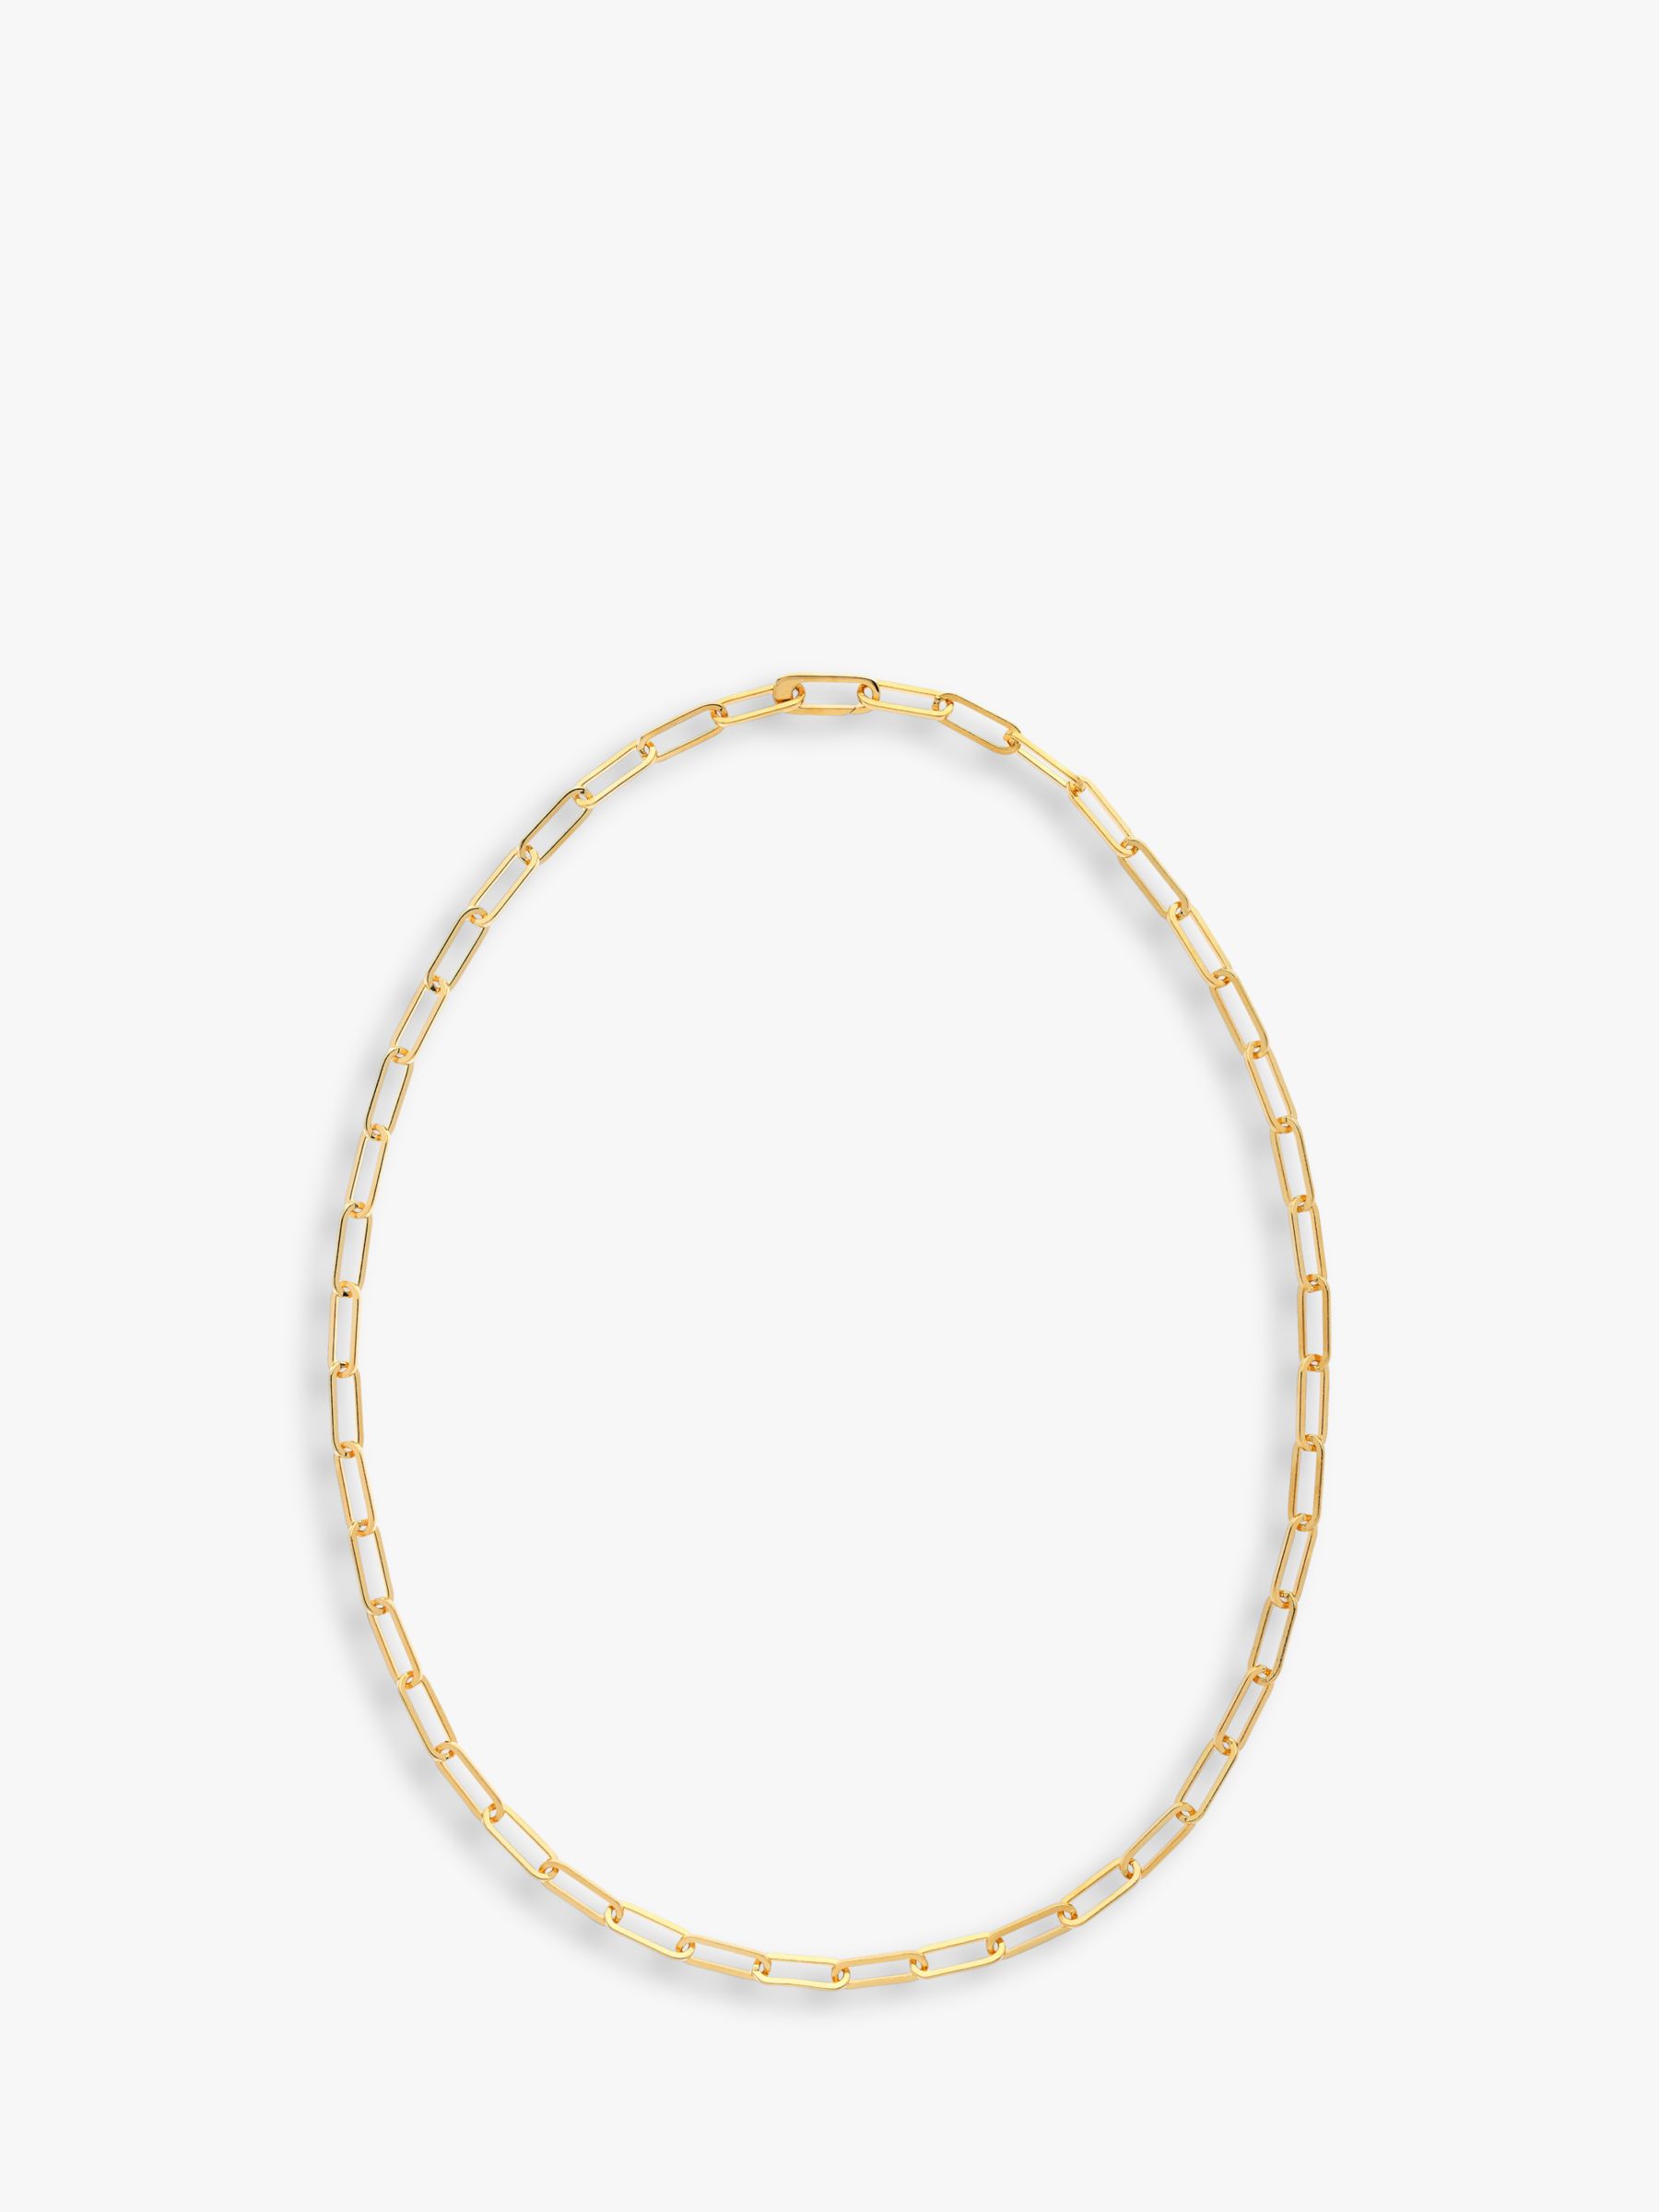 Melissa Odabash Paperclip Link Chain Necklace, Gold